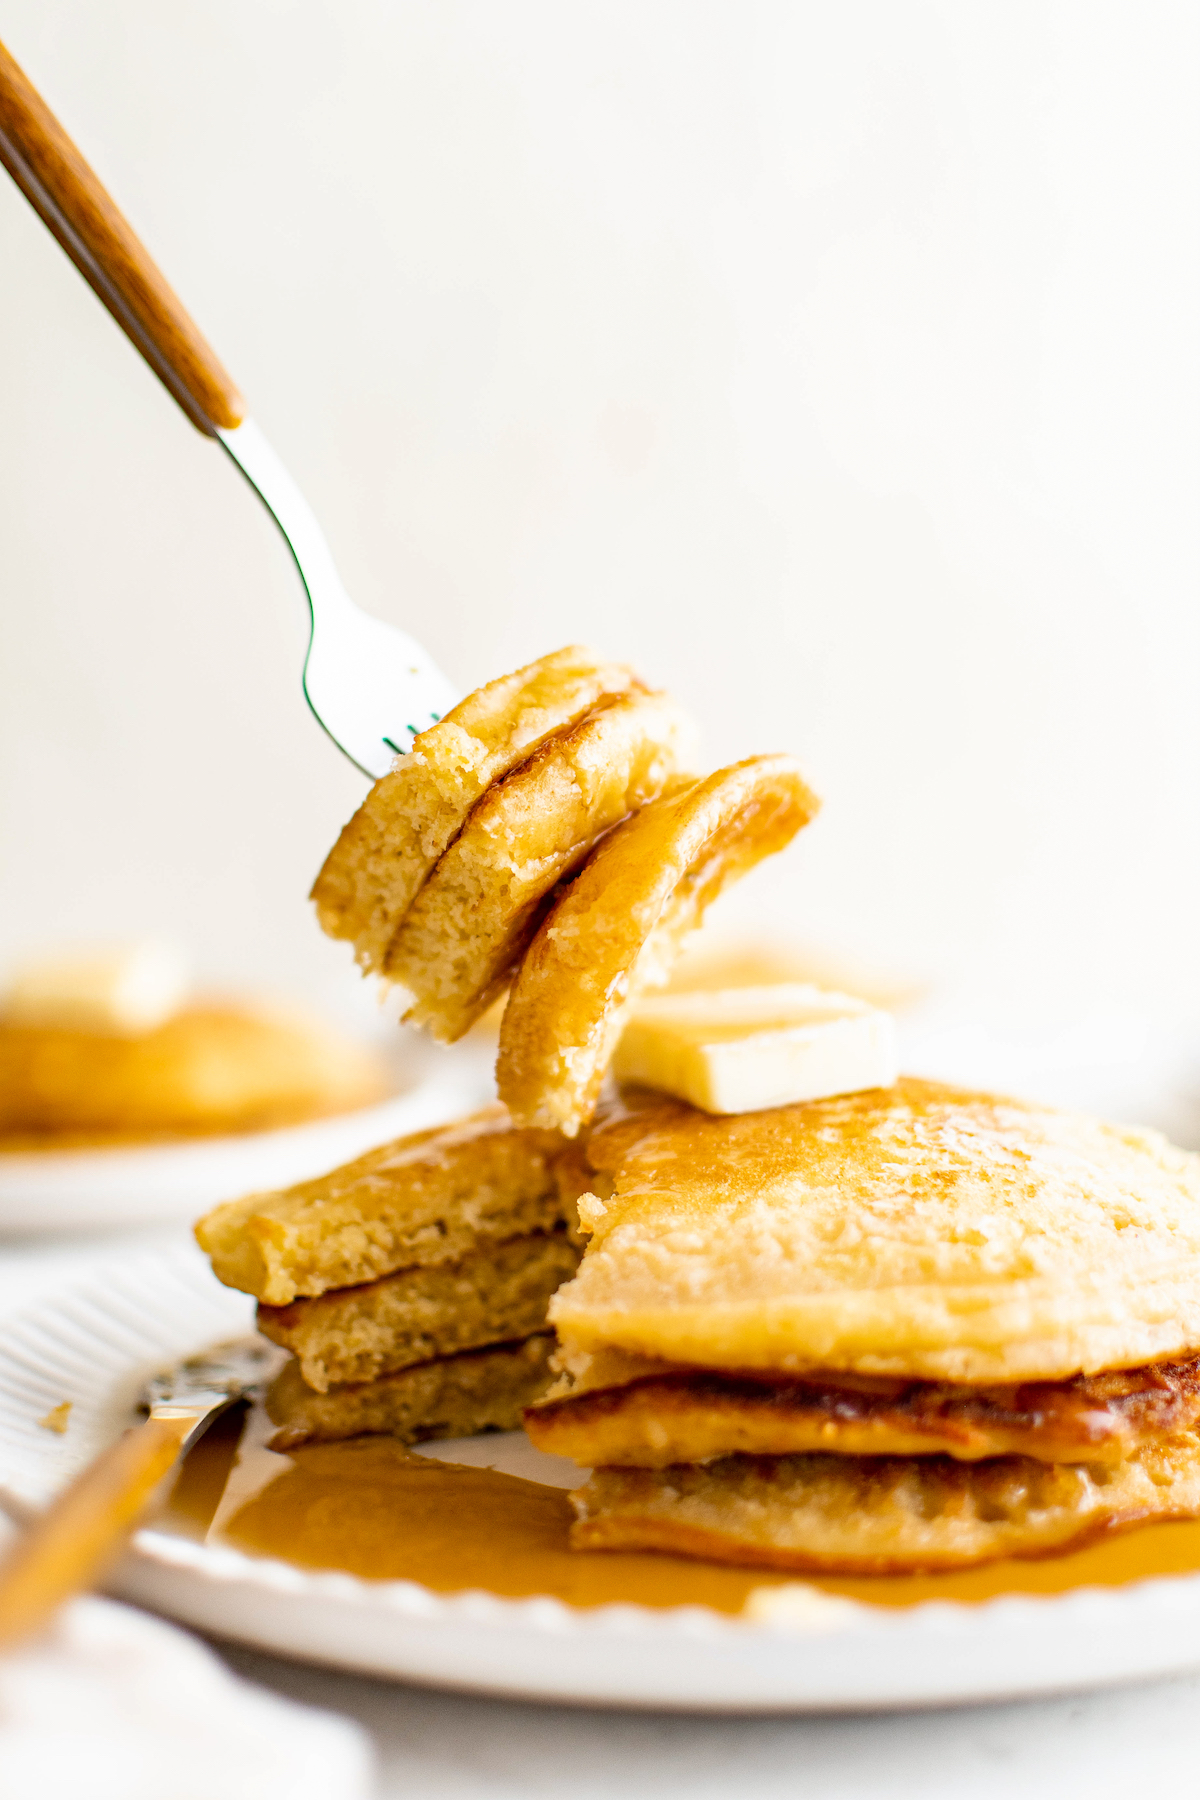 A fork lifting a bite of cornmeal pancakes from a plate.